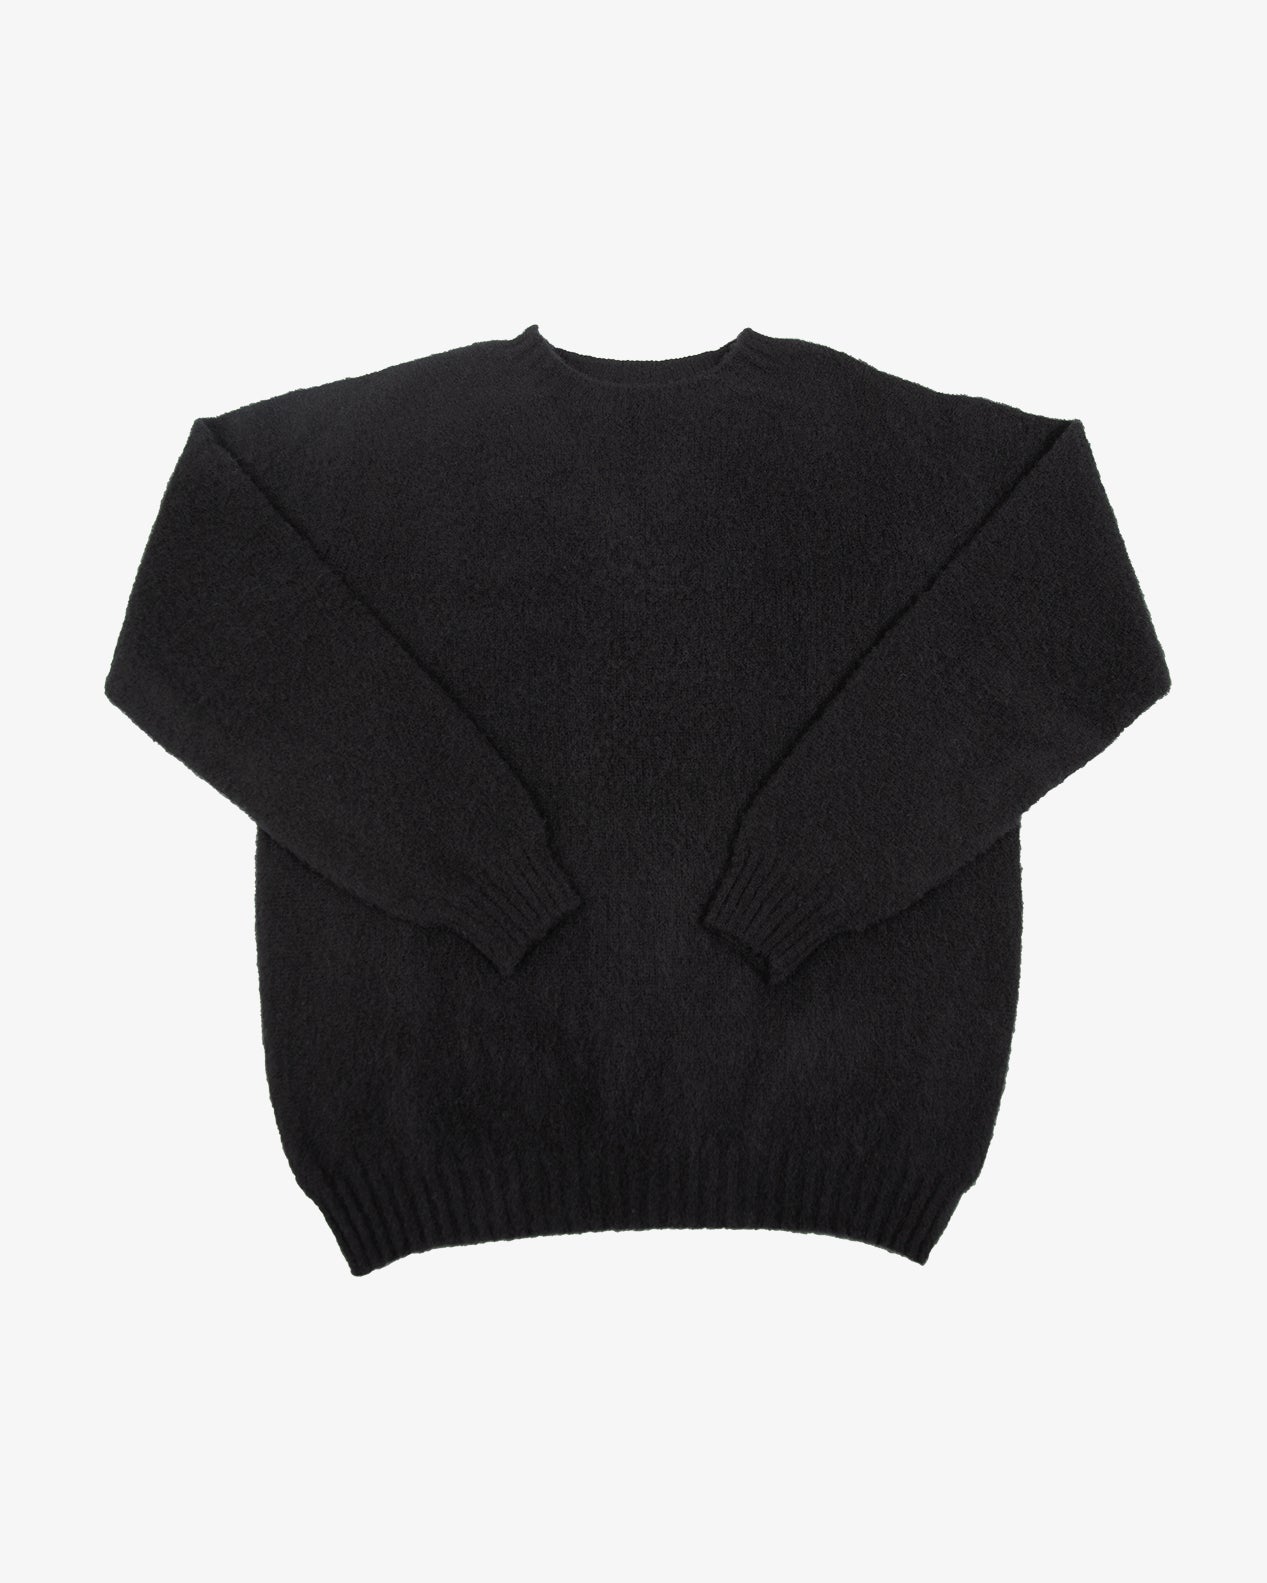 FITZROY SWEATER - DOUBLE BRUSHED BLACK